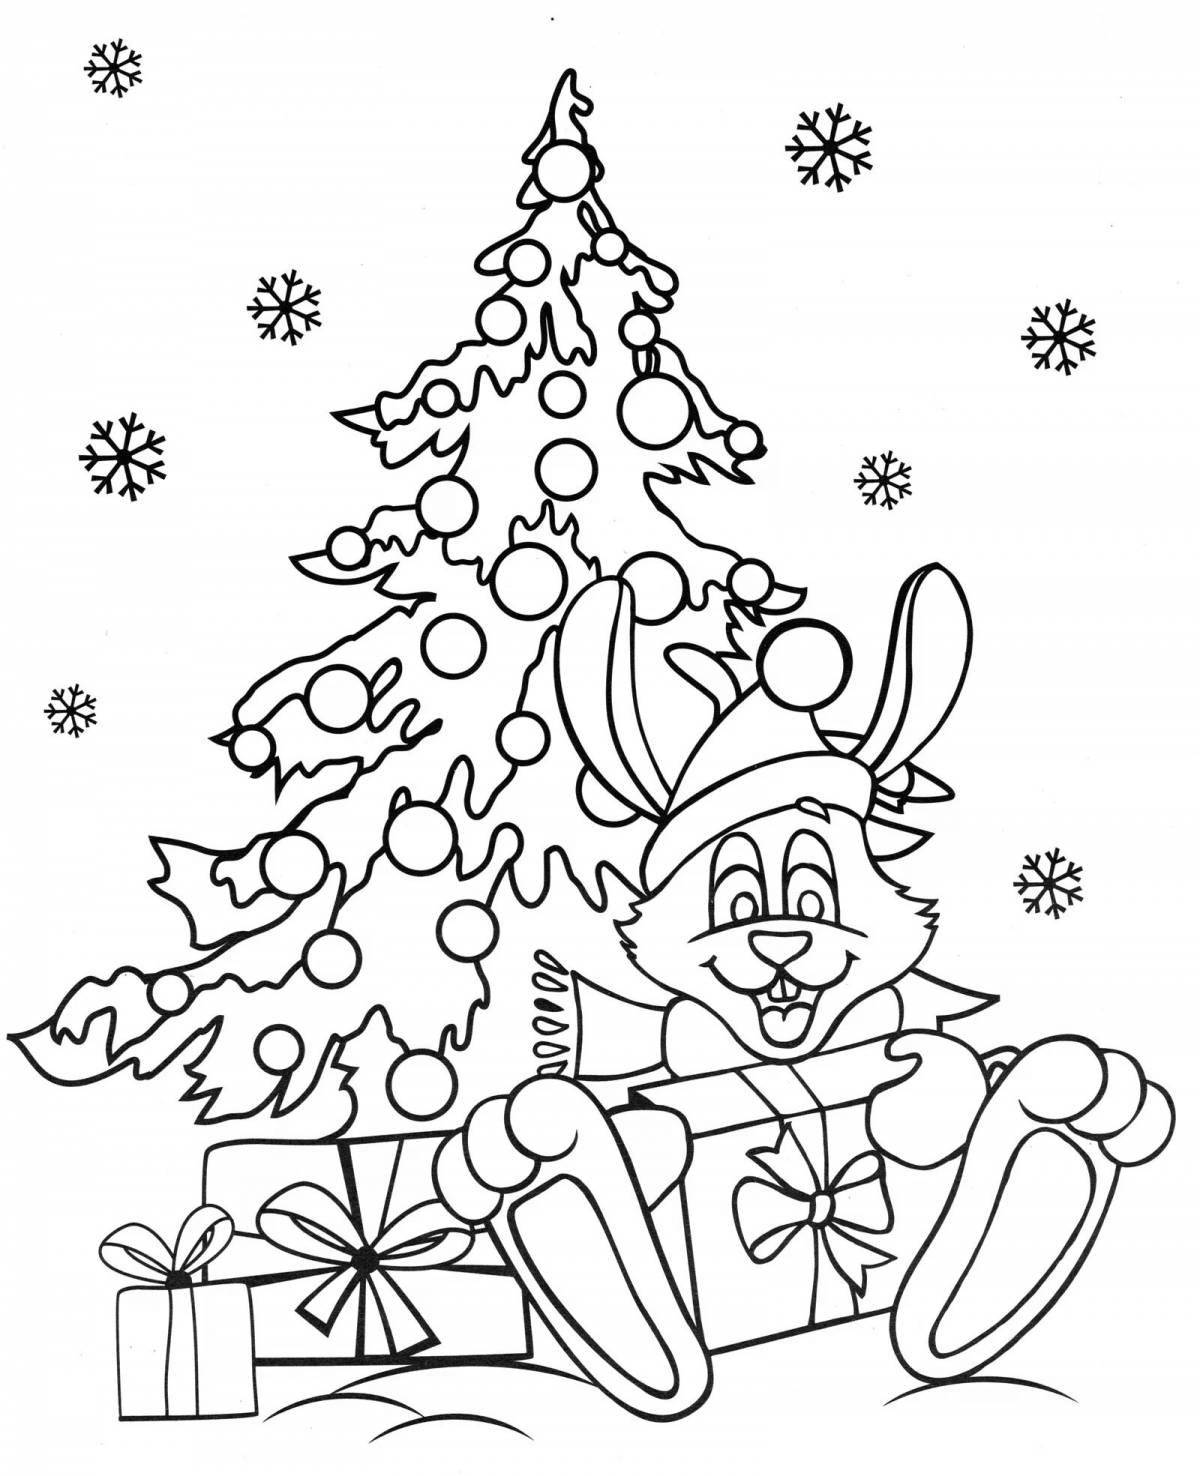 Adorable Christmas tree and rabbit coloring book